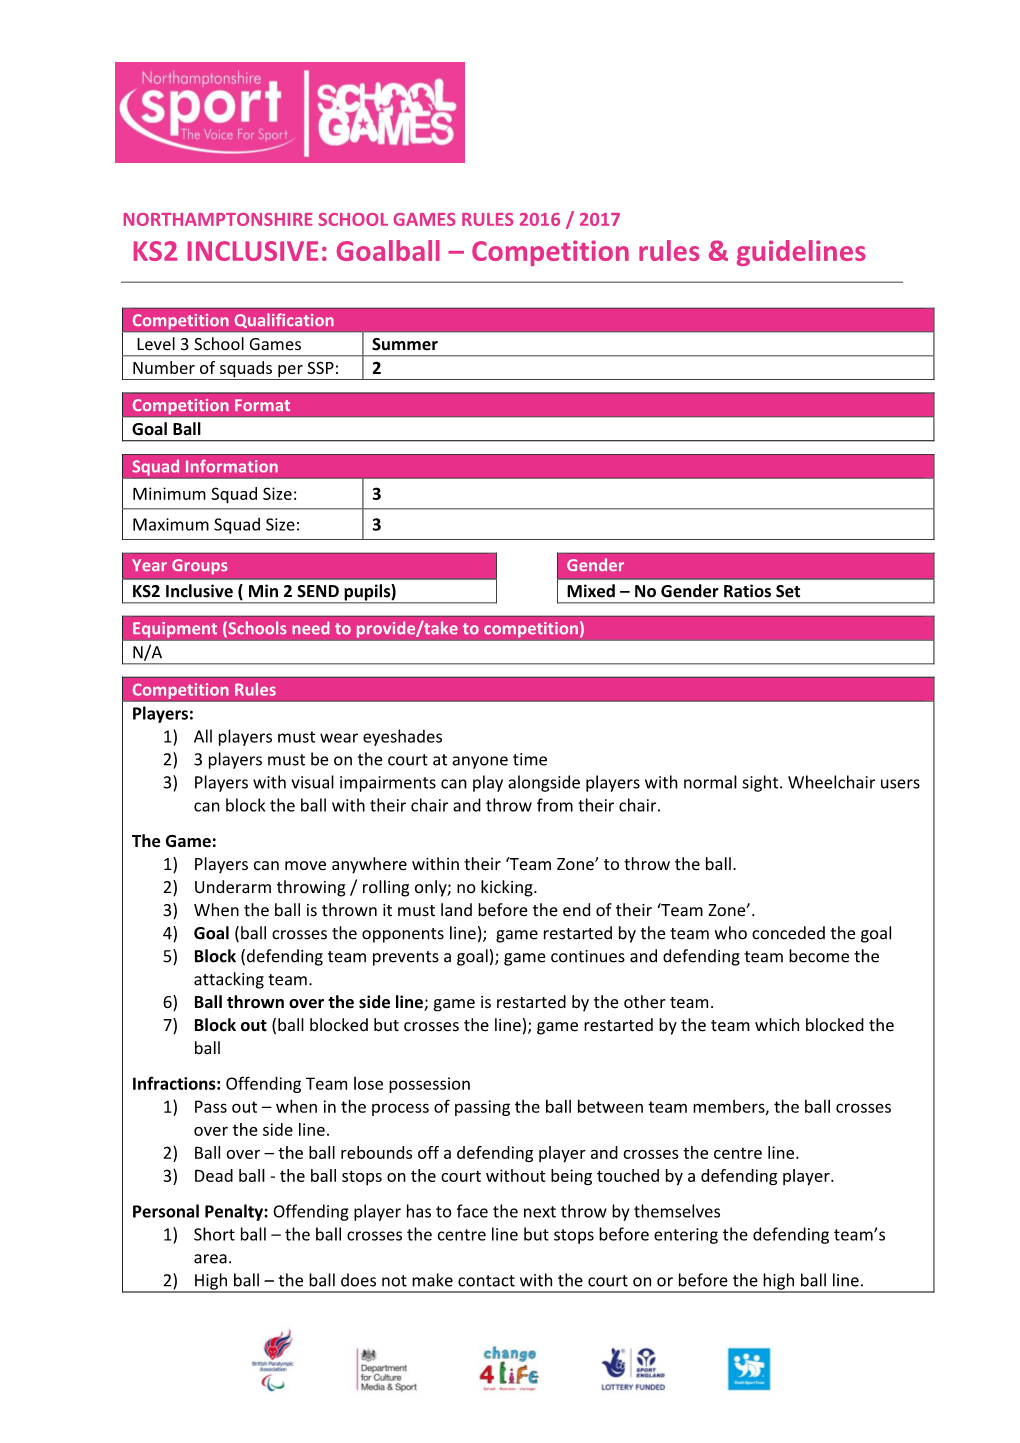 Goalball – Competition Rules & Guidelines